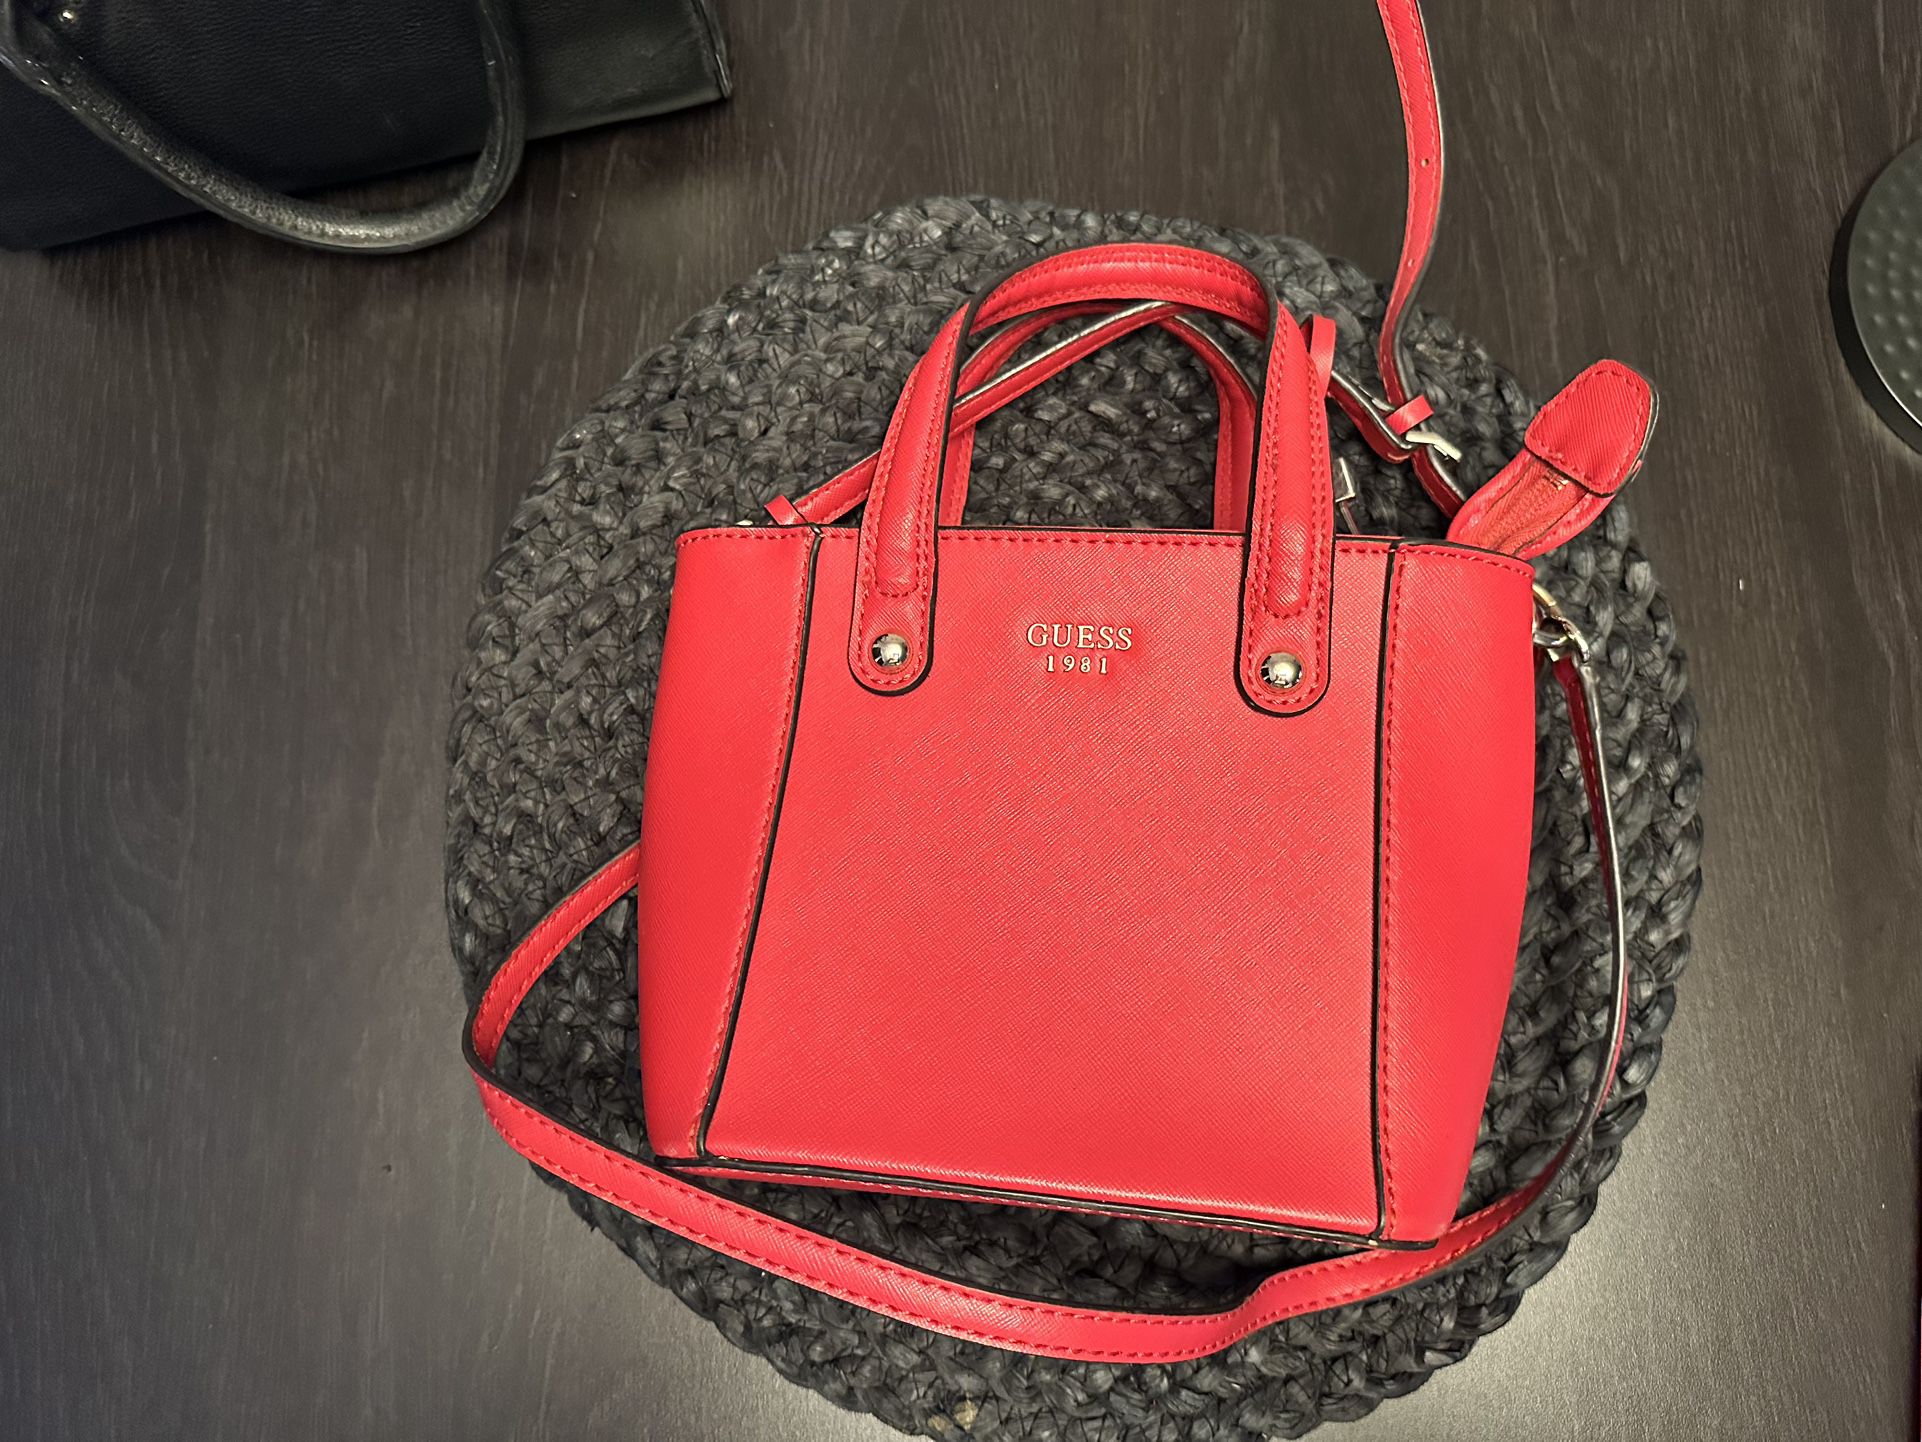 Red Guess Bag 